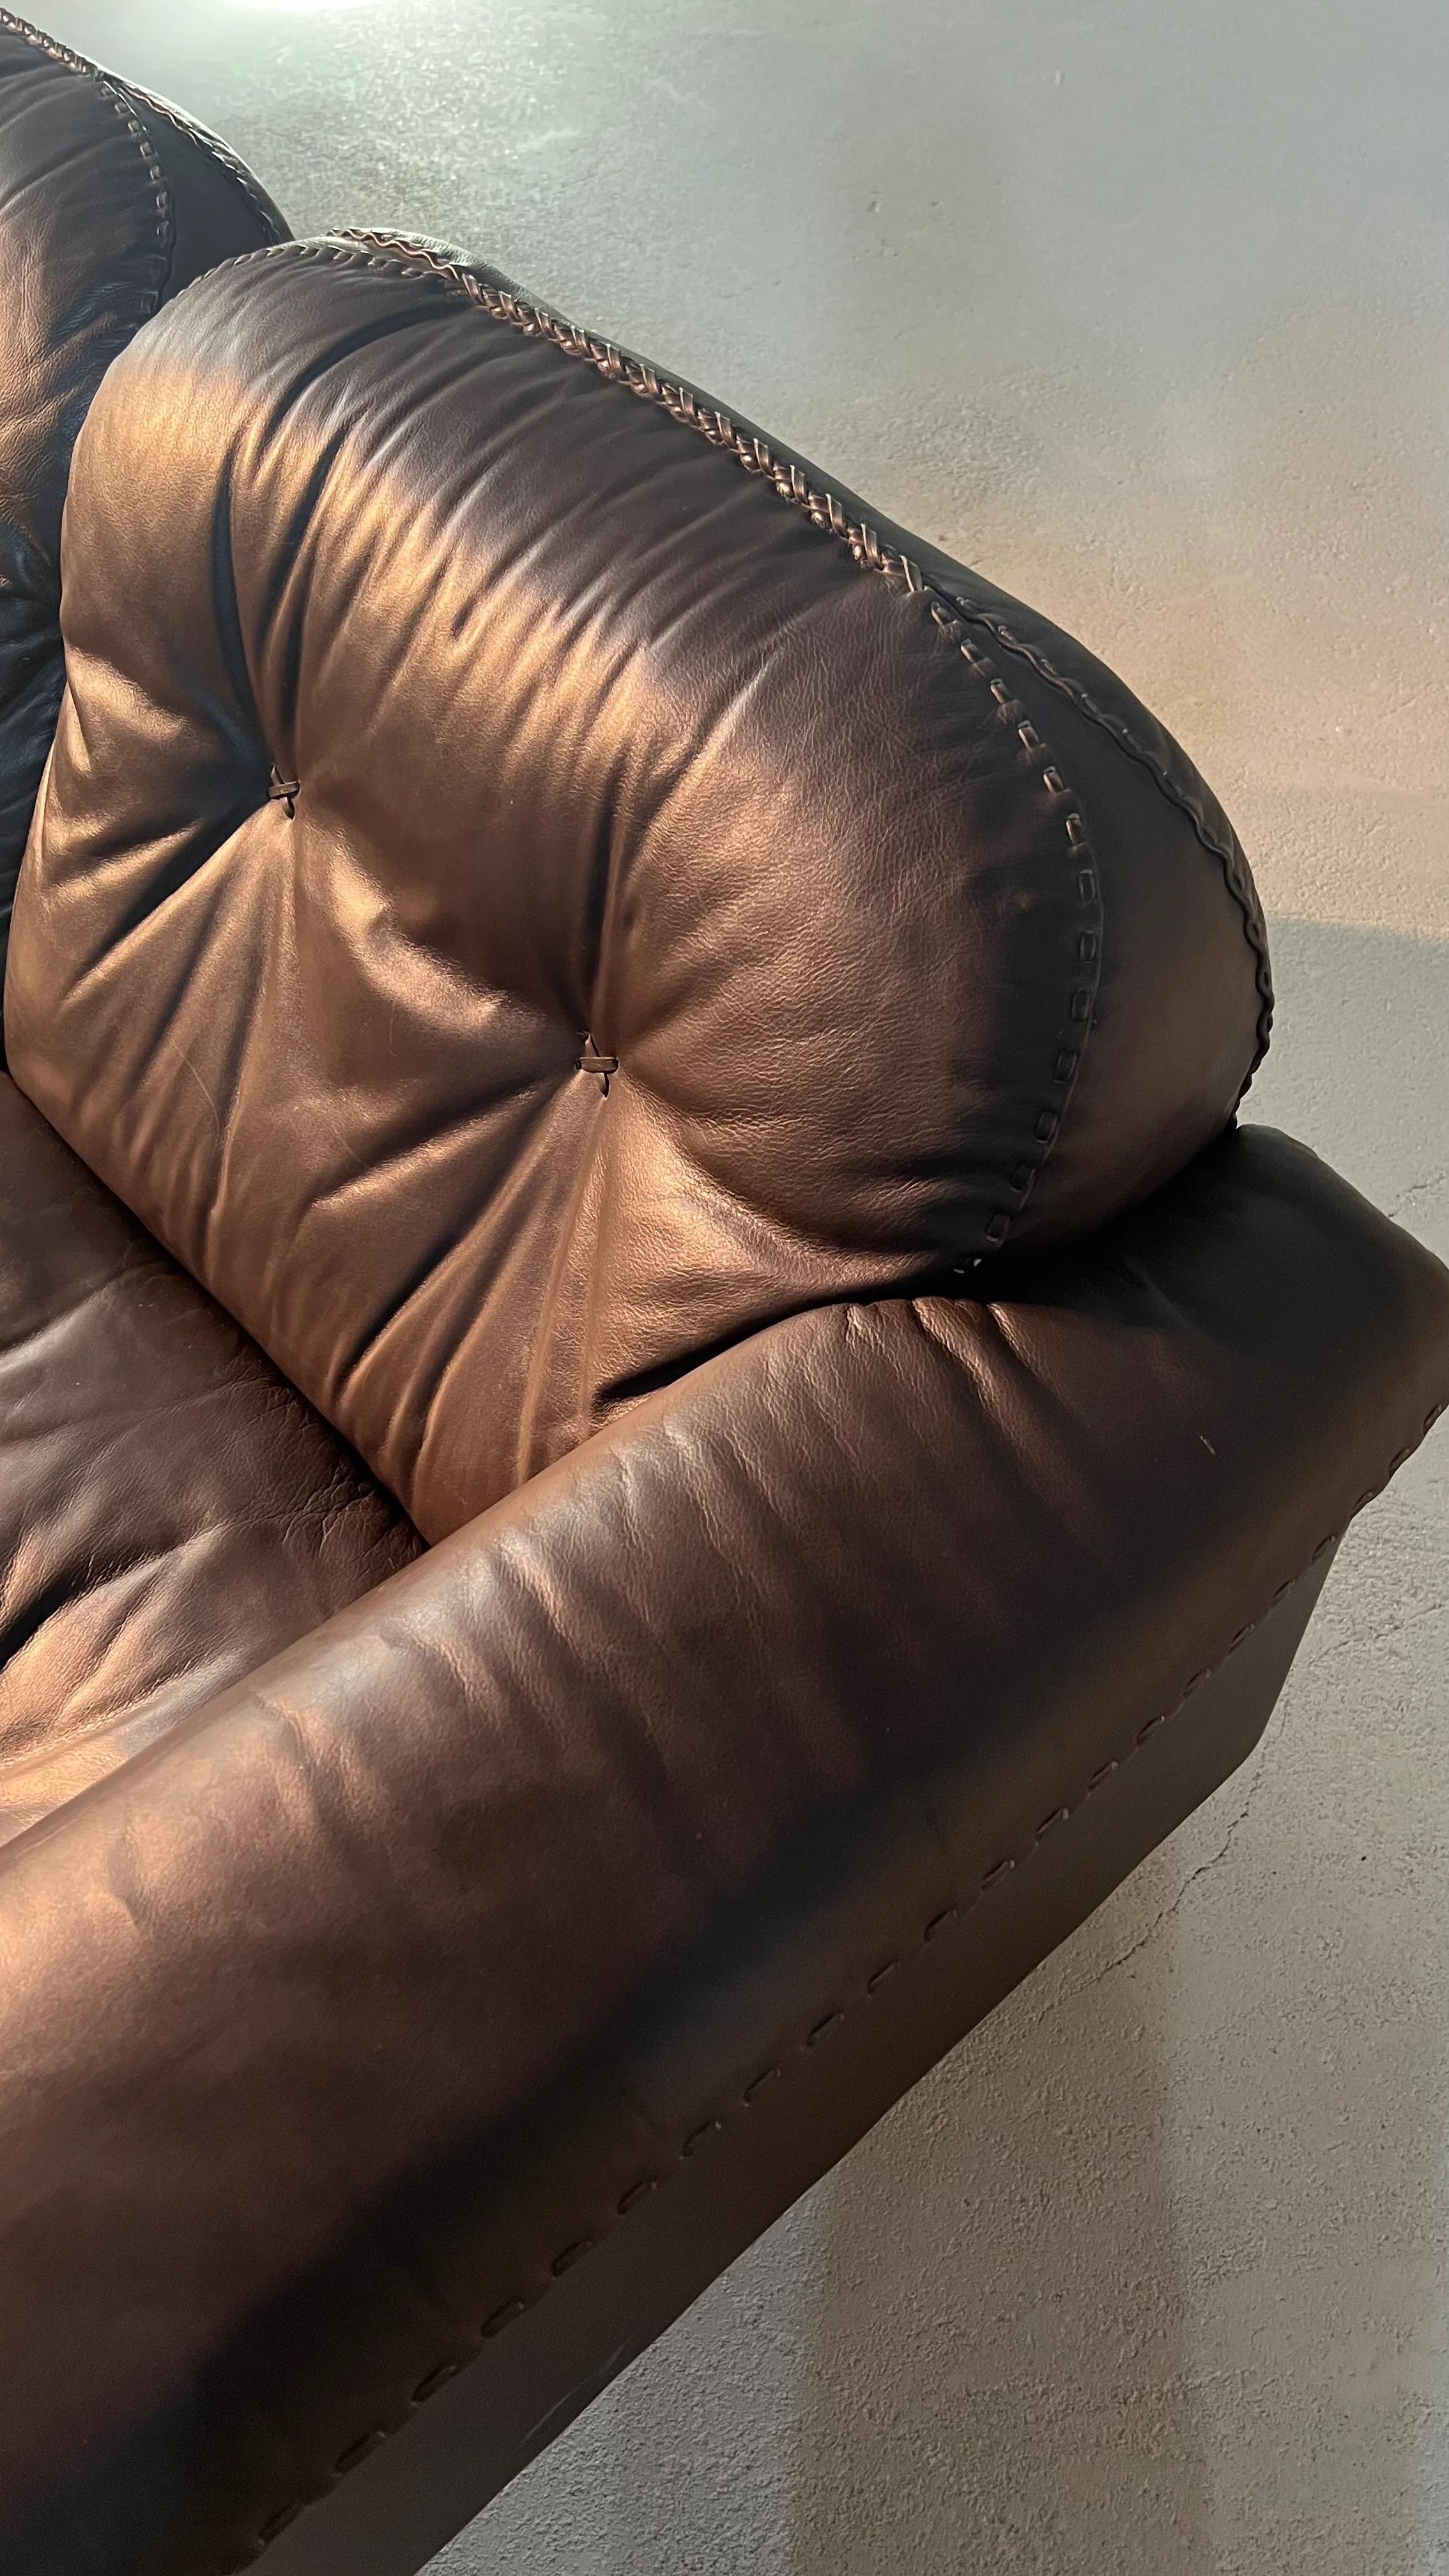 High quality Swiss design sofa from famous artisanal furniture makers De Sede. The brown leather and baseball stitching give this midcentury the typical brutalist character. The seat and back can be adjusted to a lower lounge position.
